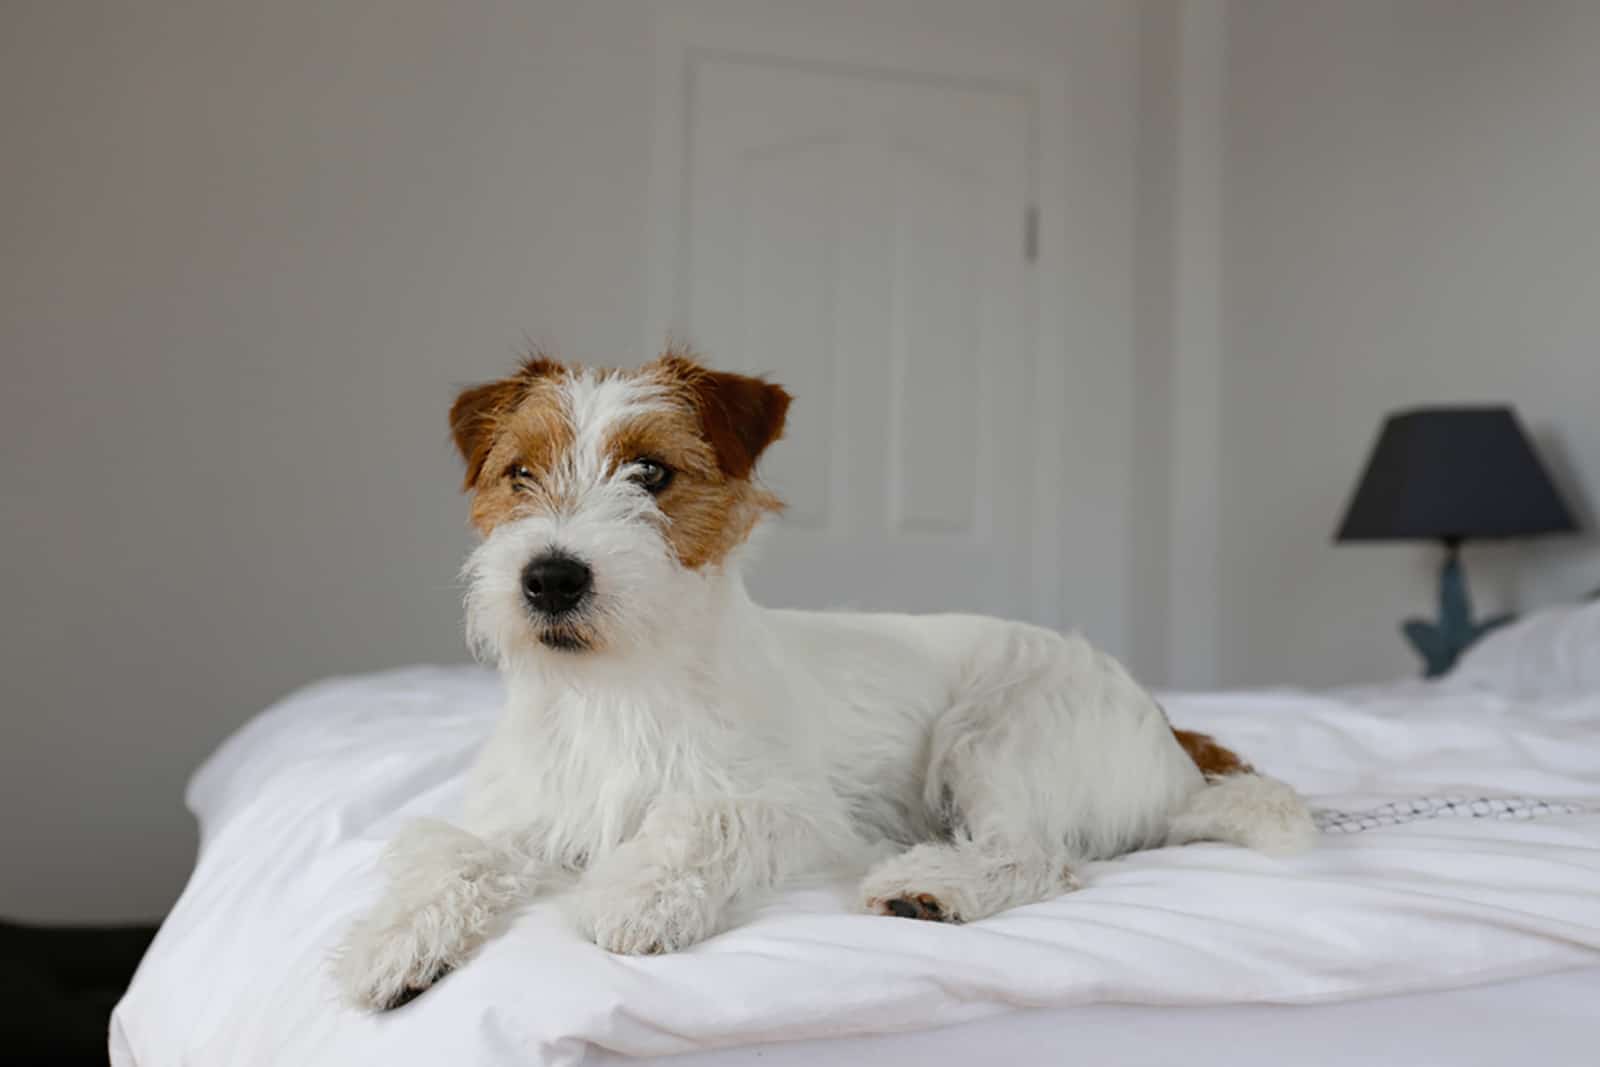 Long-Haired Jack Russell Terrier: Is There Such A Thing?